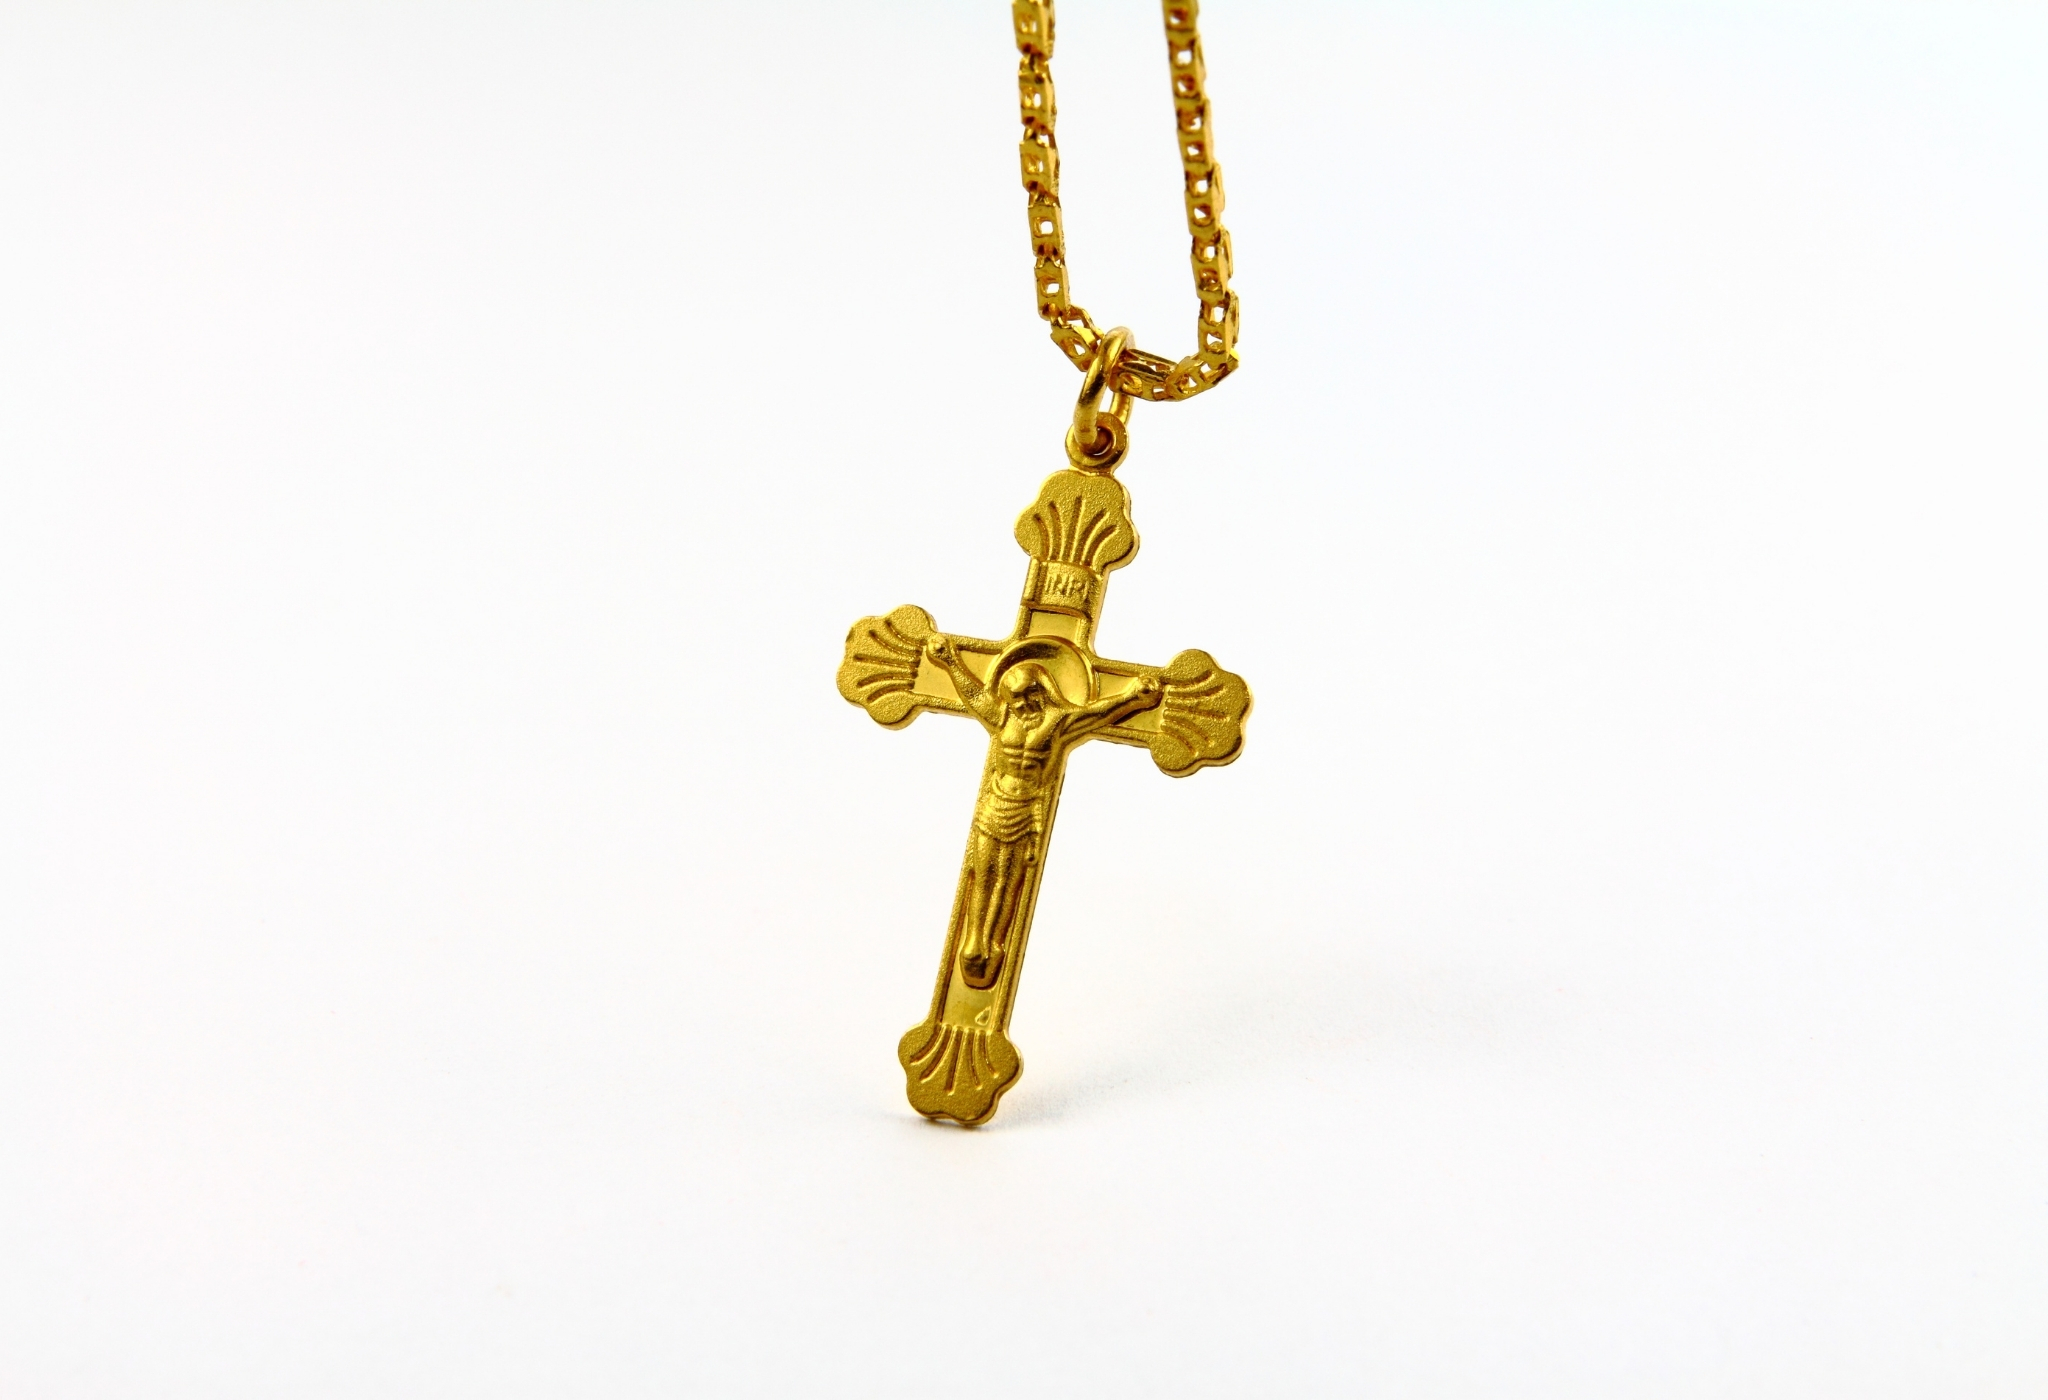 religious pendants like a gold cross is how men wear necklaces